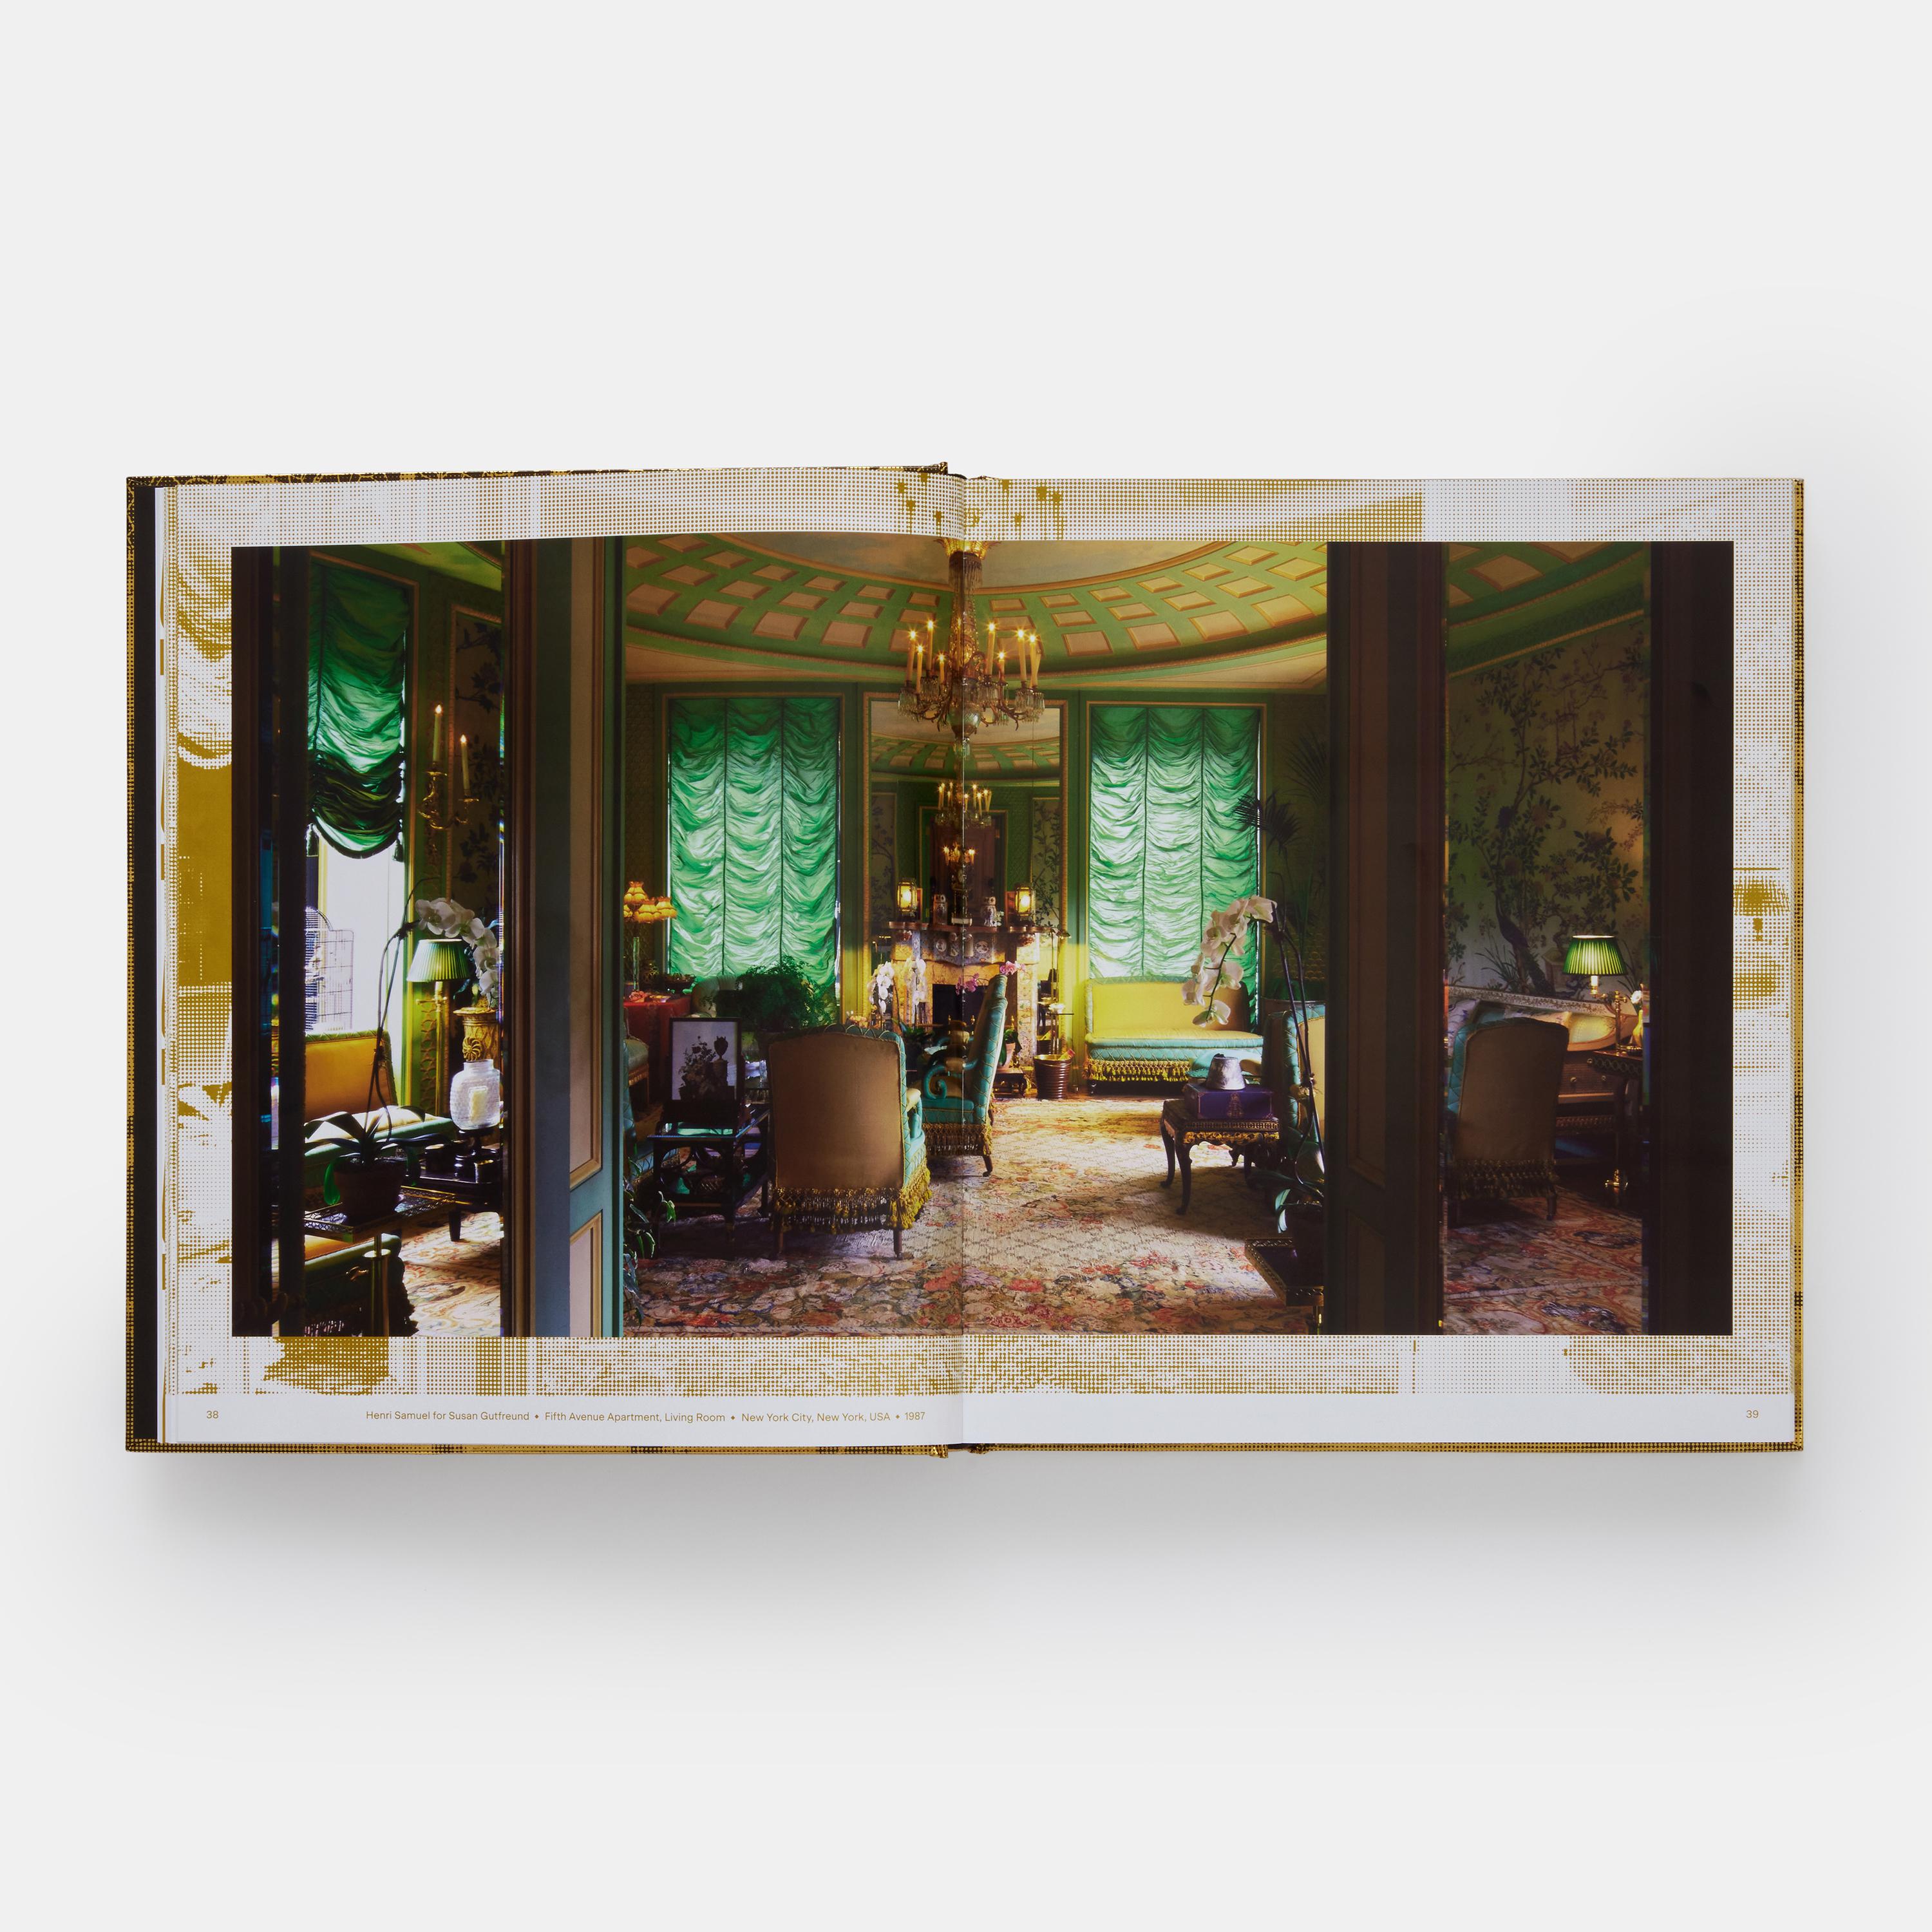 A decadent and extravagant celebration of interior style, featuring more than 220 maximalist residential interiors, from the 1600s to the present day

This unique visual collection celebrates the very best contemporary Maximalist interior design and